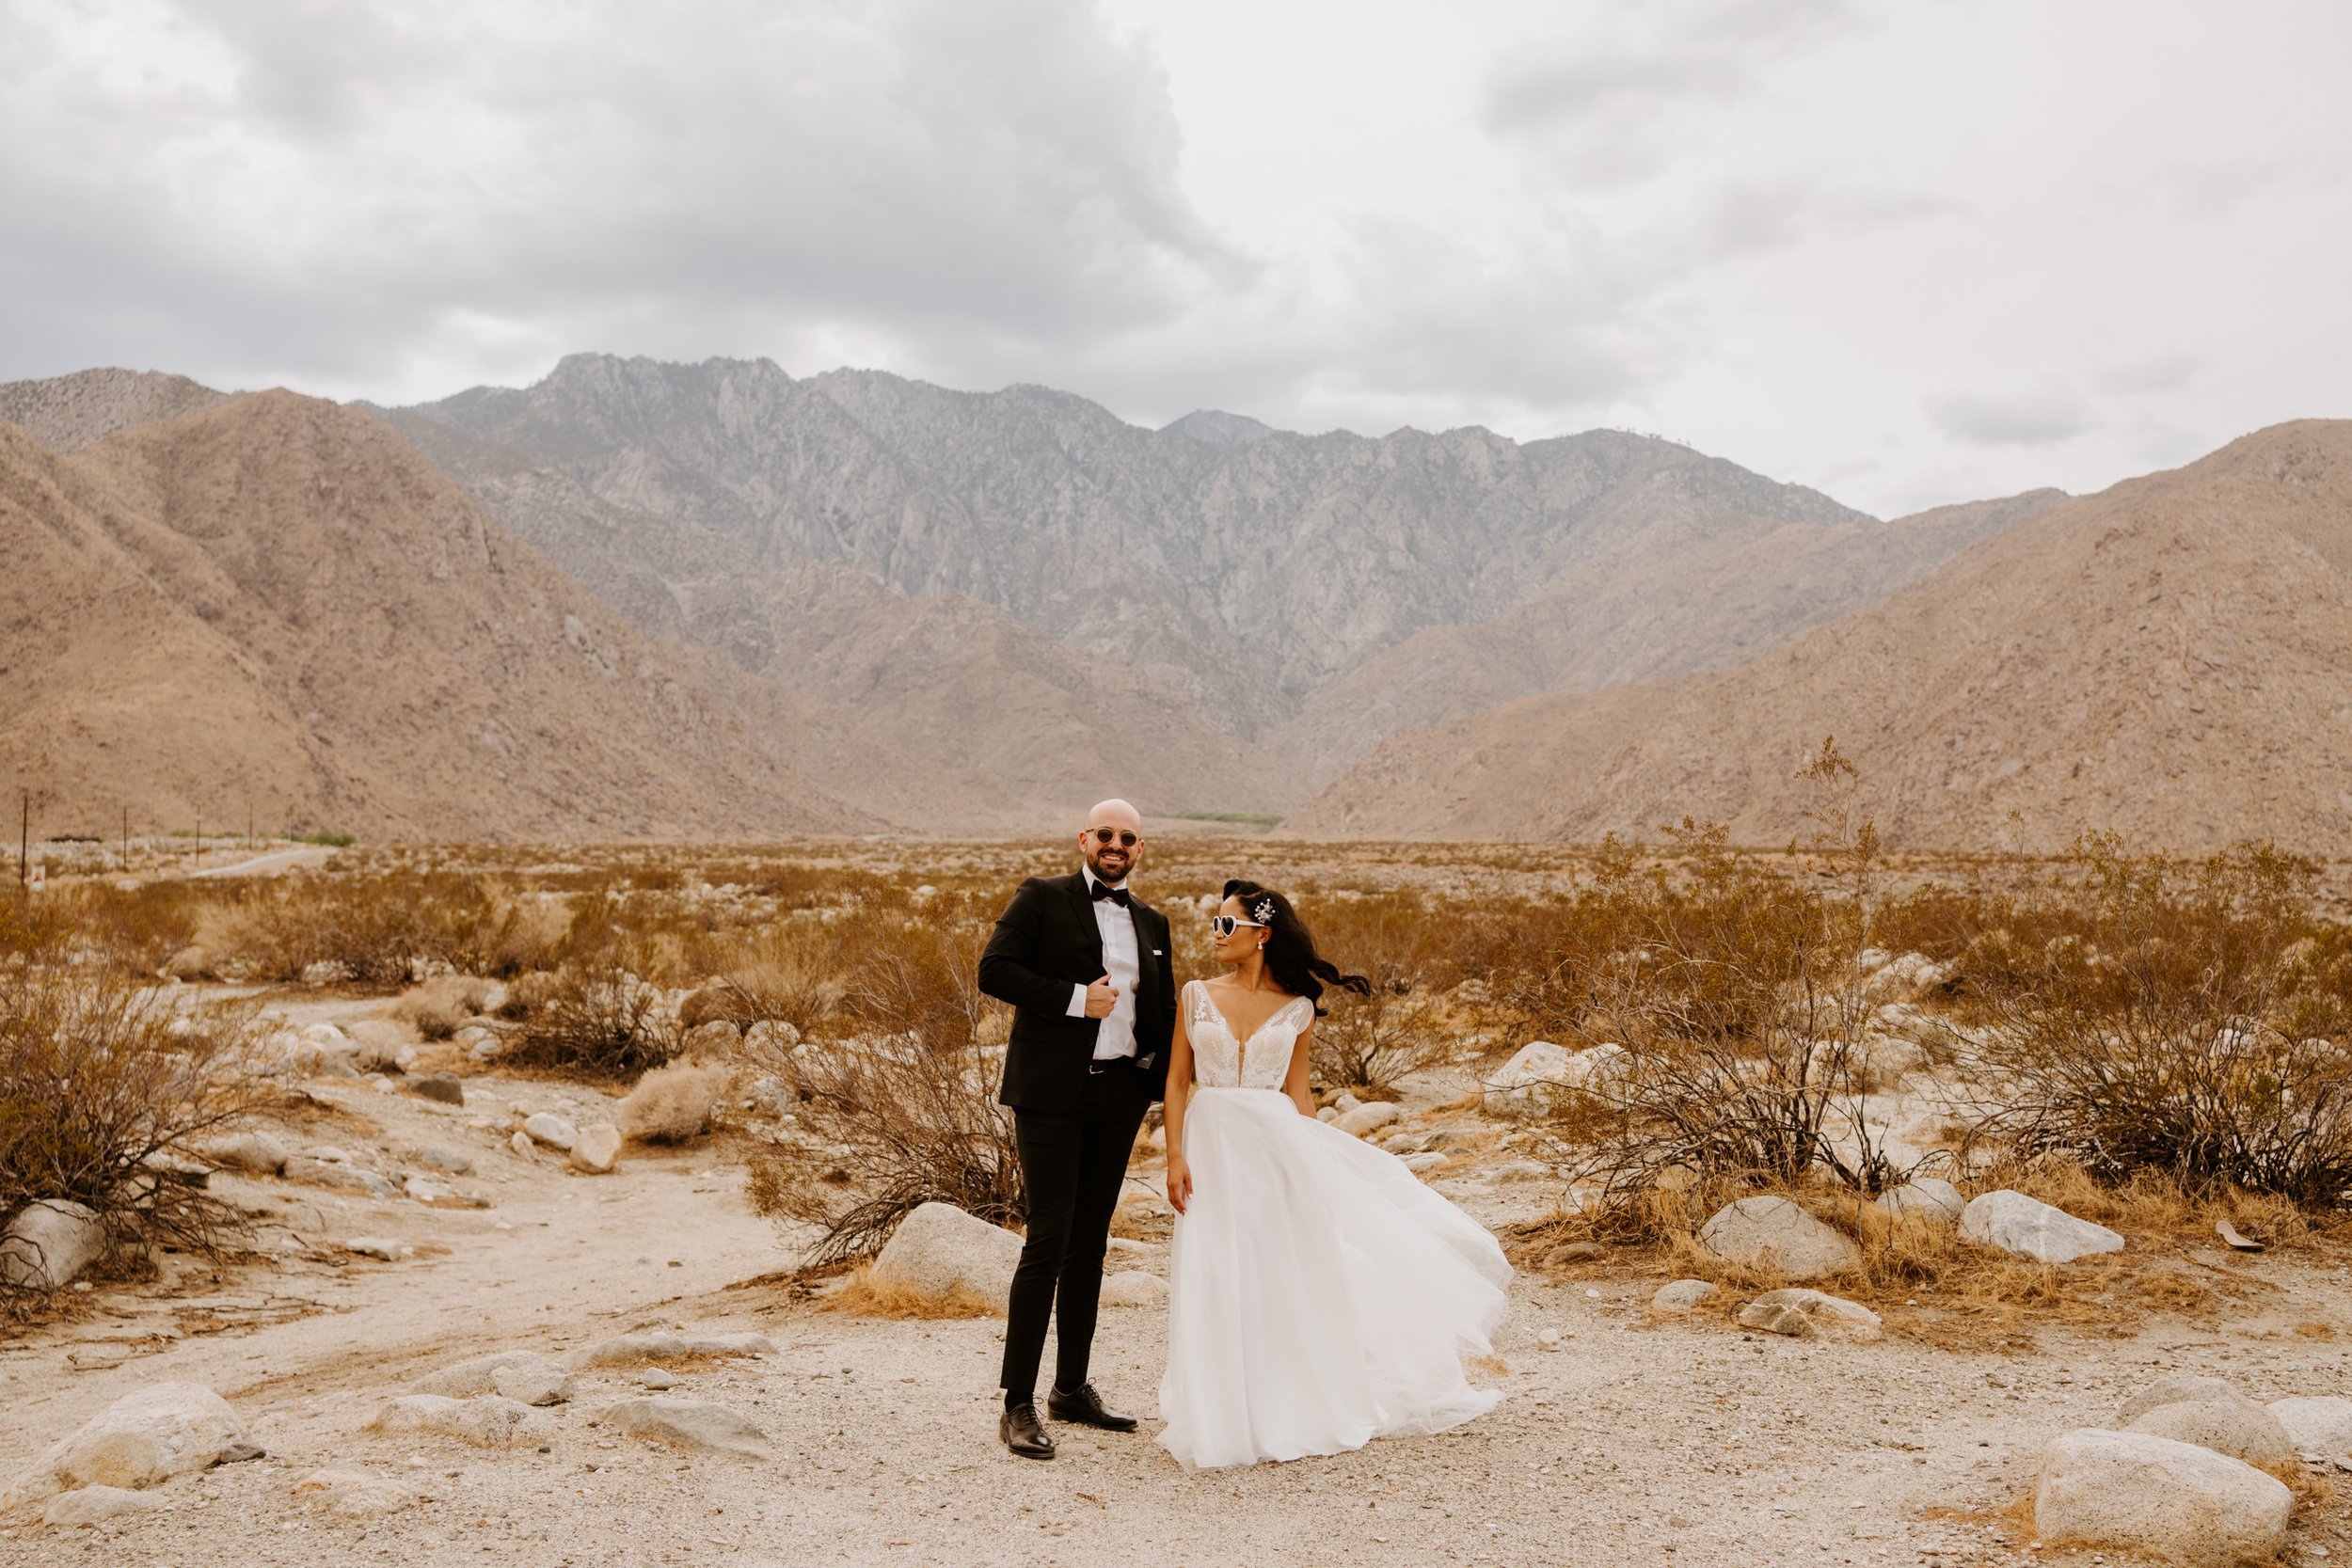 Bride and groom Palm Springs desert wedding photo, Photo by Tida Svy, Palm Springs Elopement Photographer